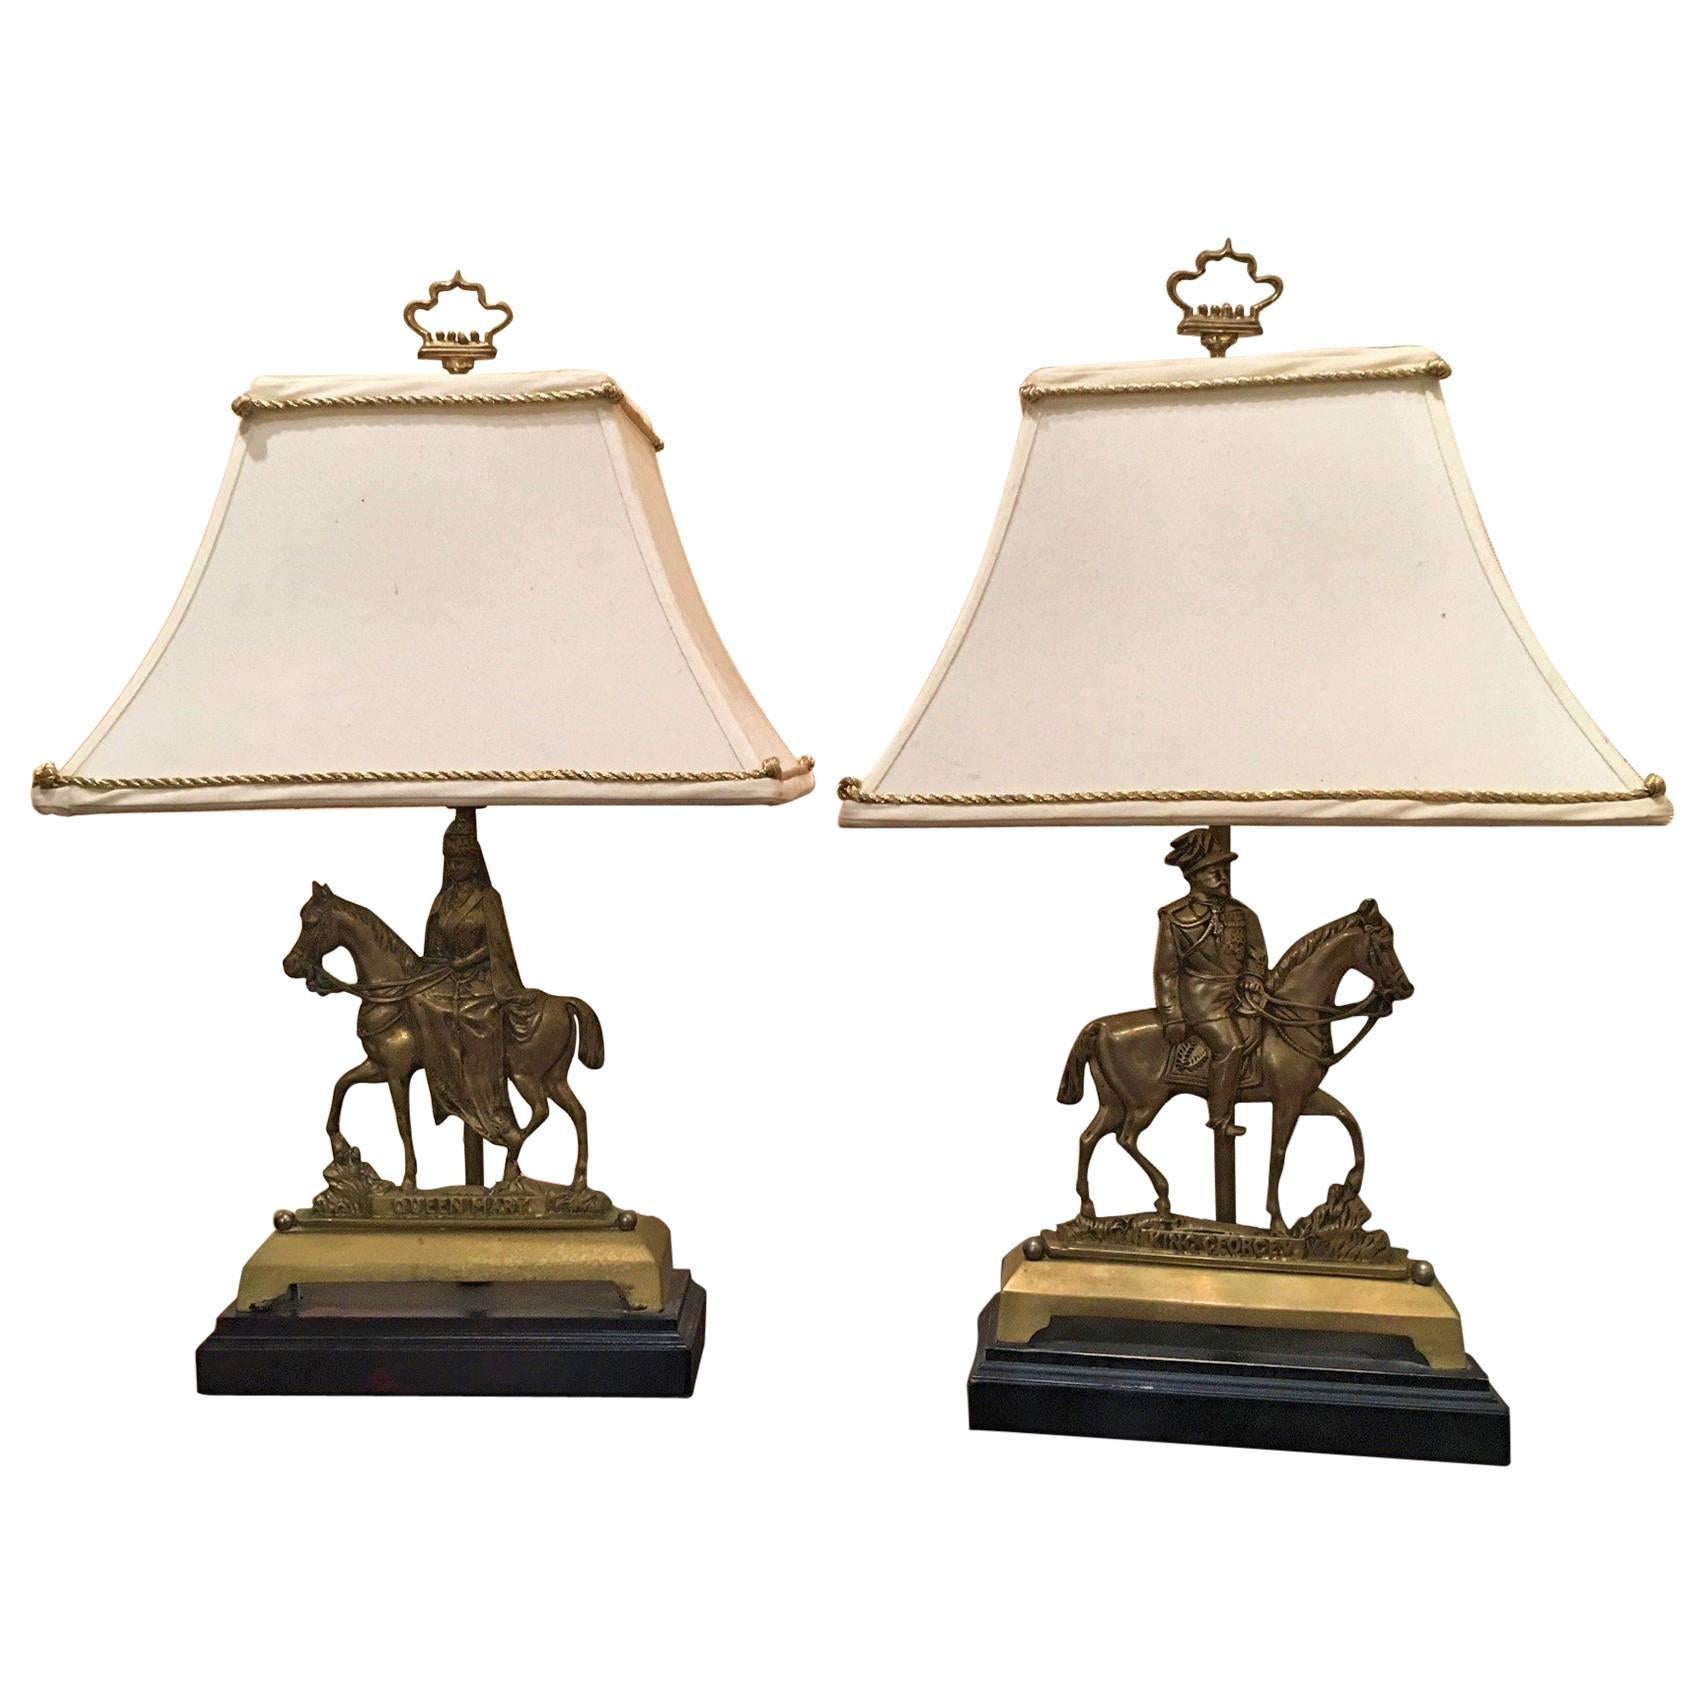 Pair of Brass Chenets Adapted as Table Lamps on Wood Bases, 19th Century